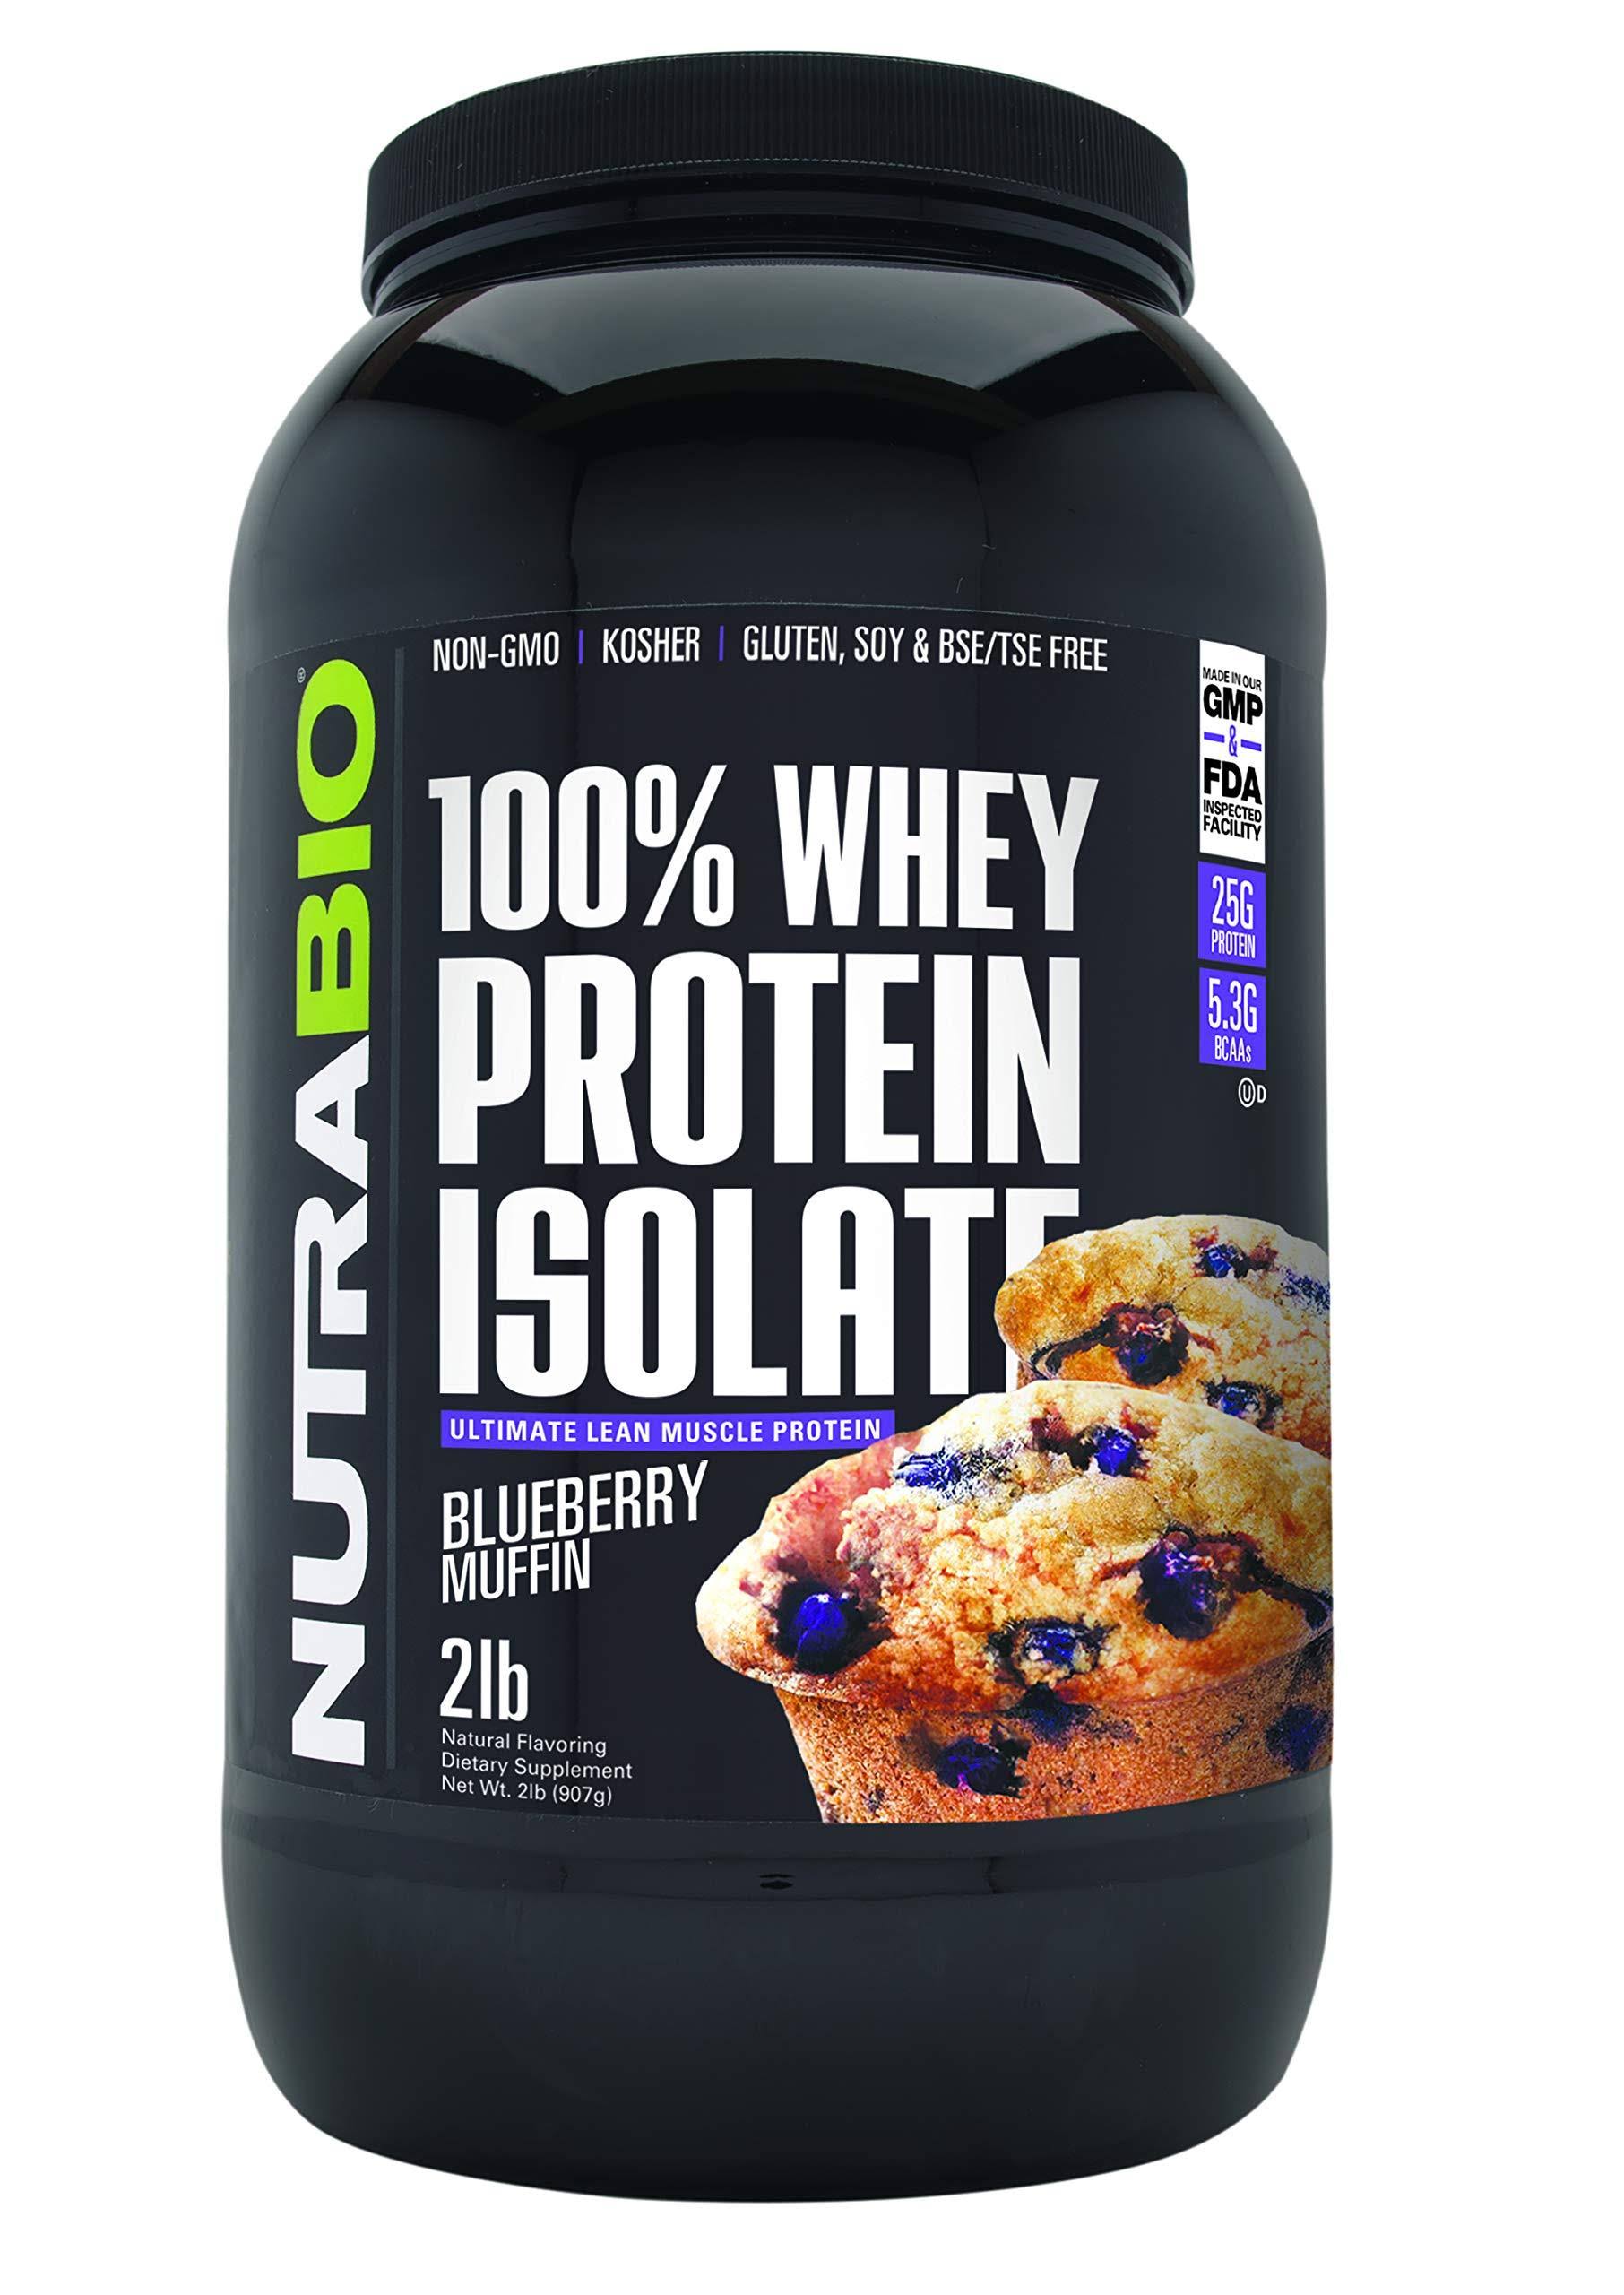 NutraBio Whey Protein Isolate 907g Blueberry Muffin